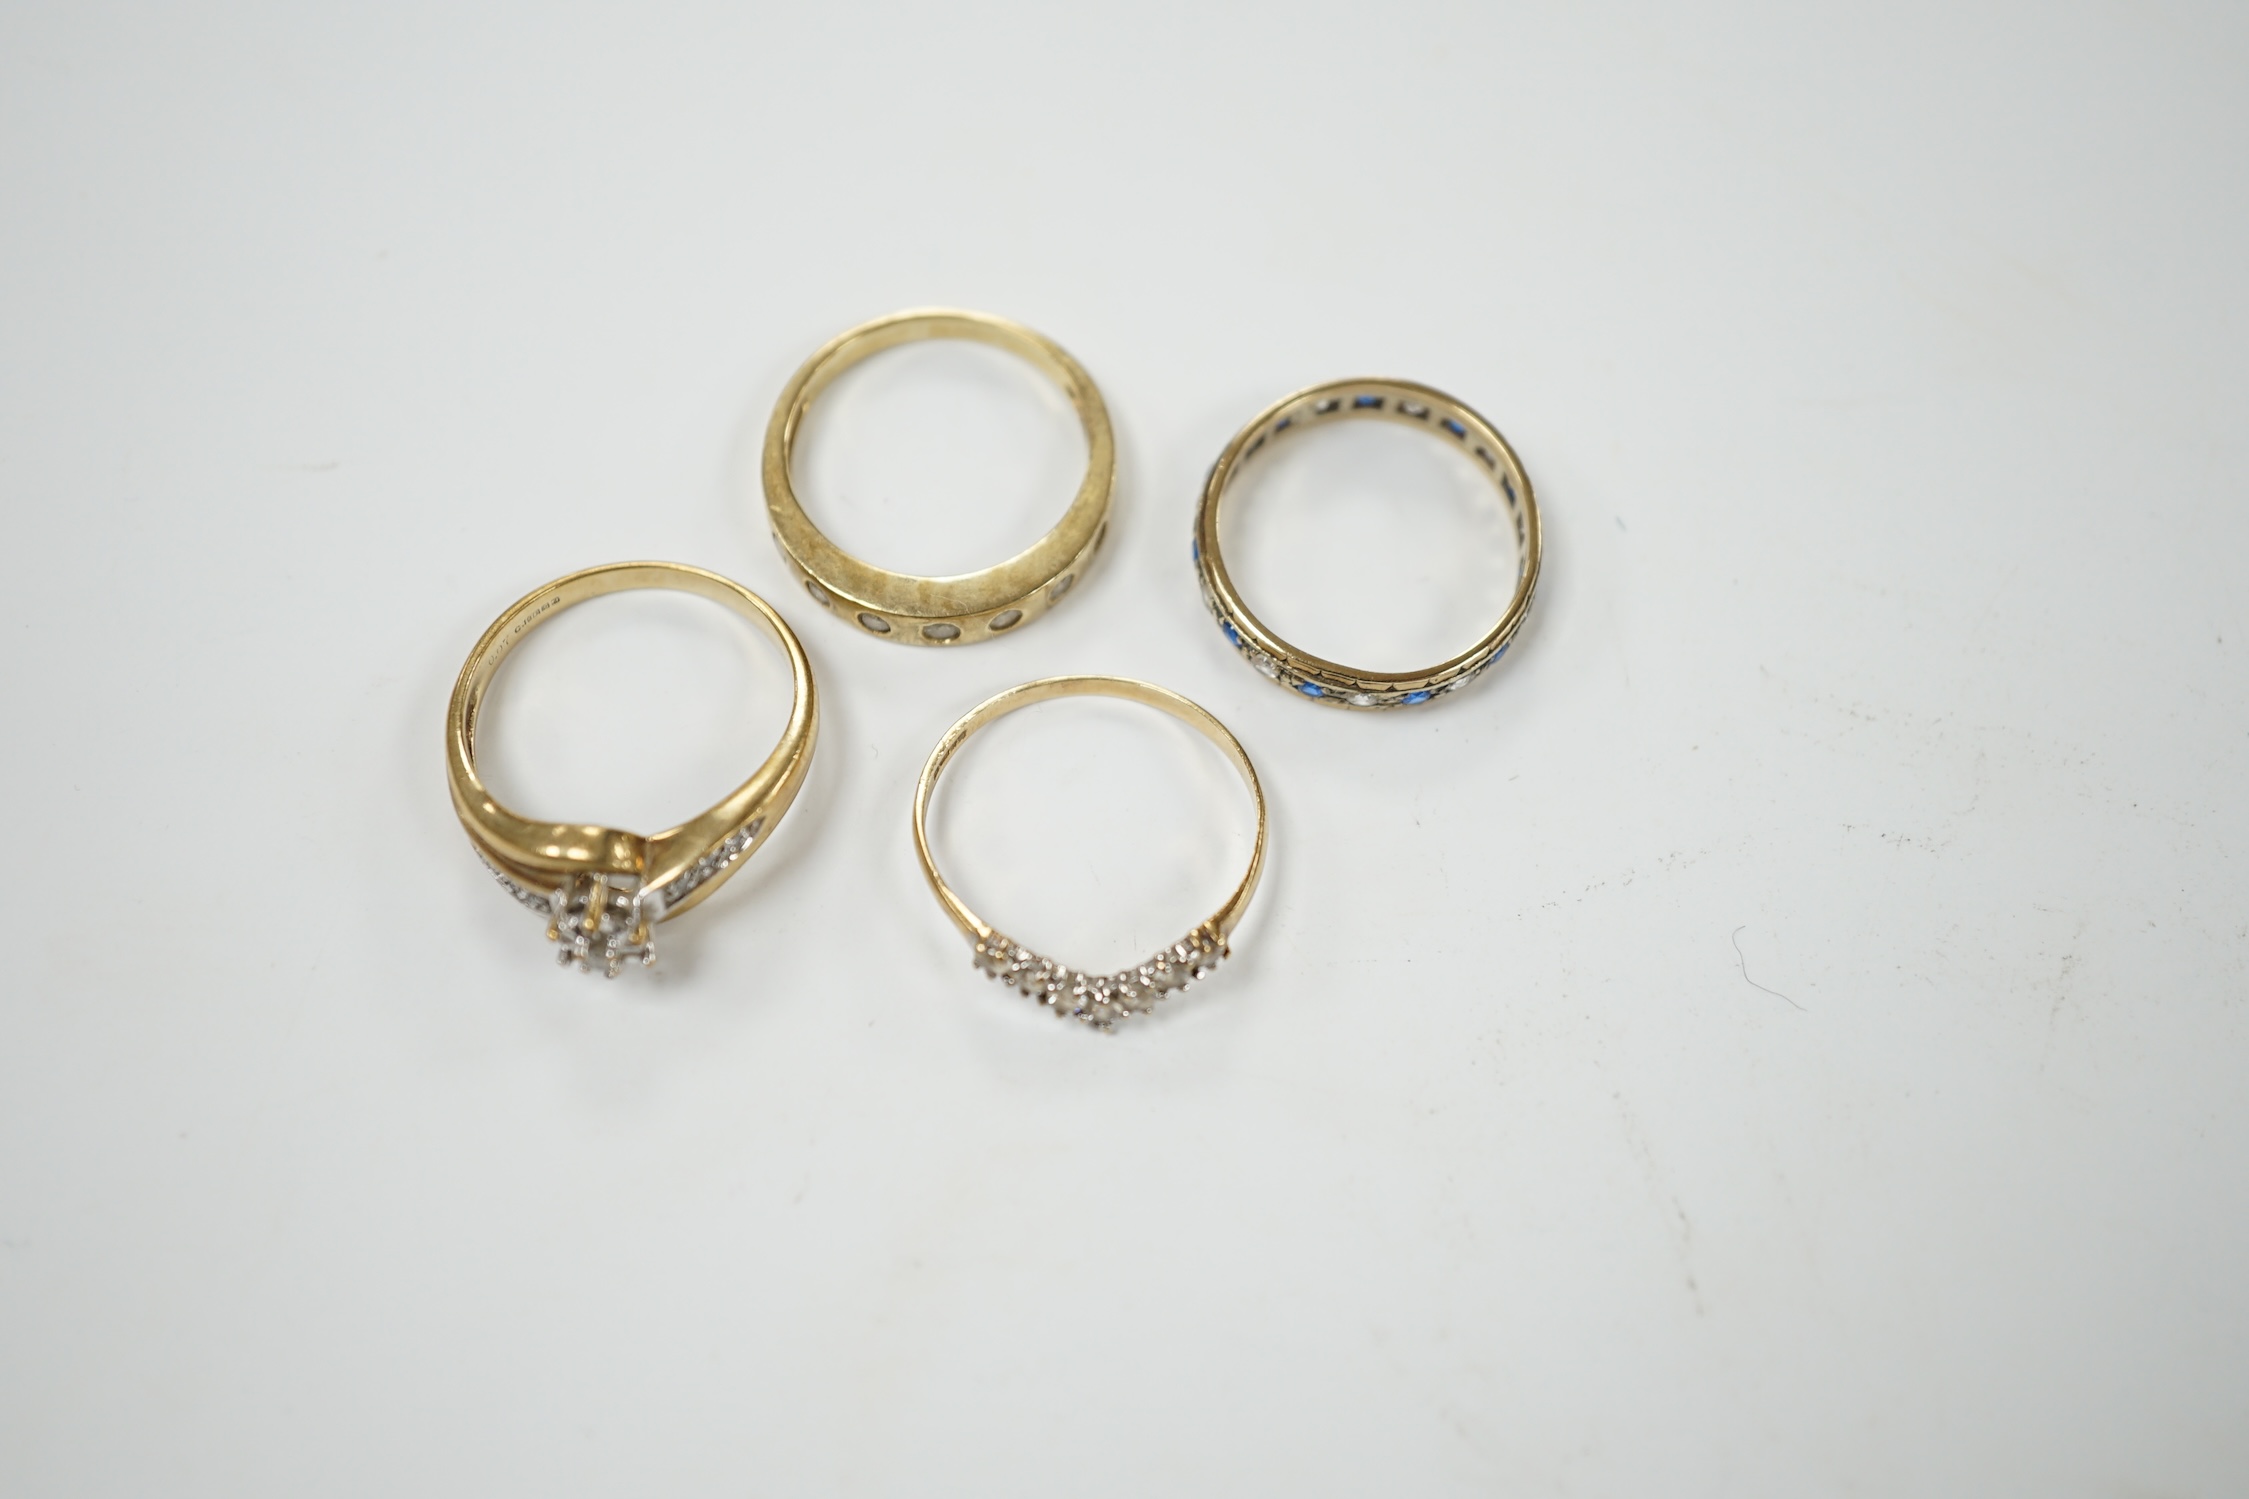 Two modern 9ct gold and diamond set rings and a 9ct gold, simulated diamond set chevron shaped ring and one other 9ct and paste set band, gross weight 9 grams. Condition - poor to fair